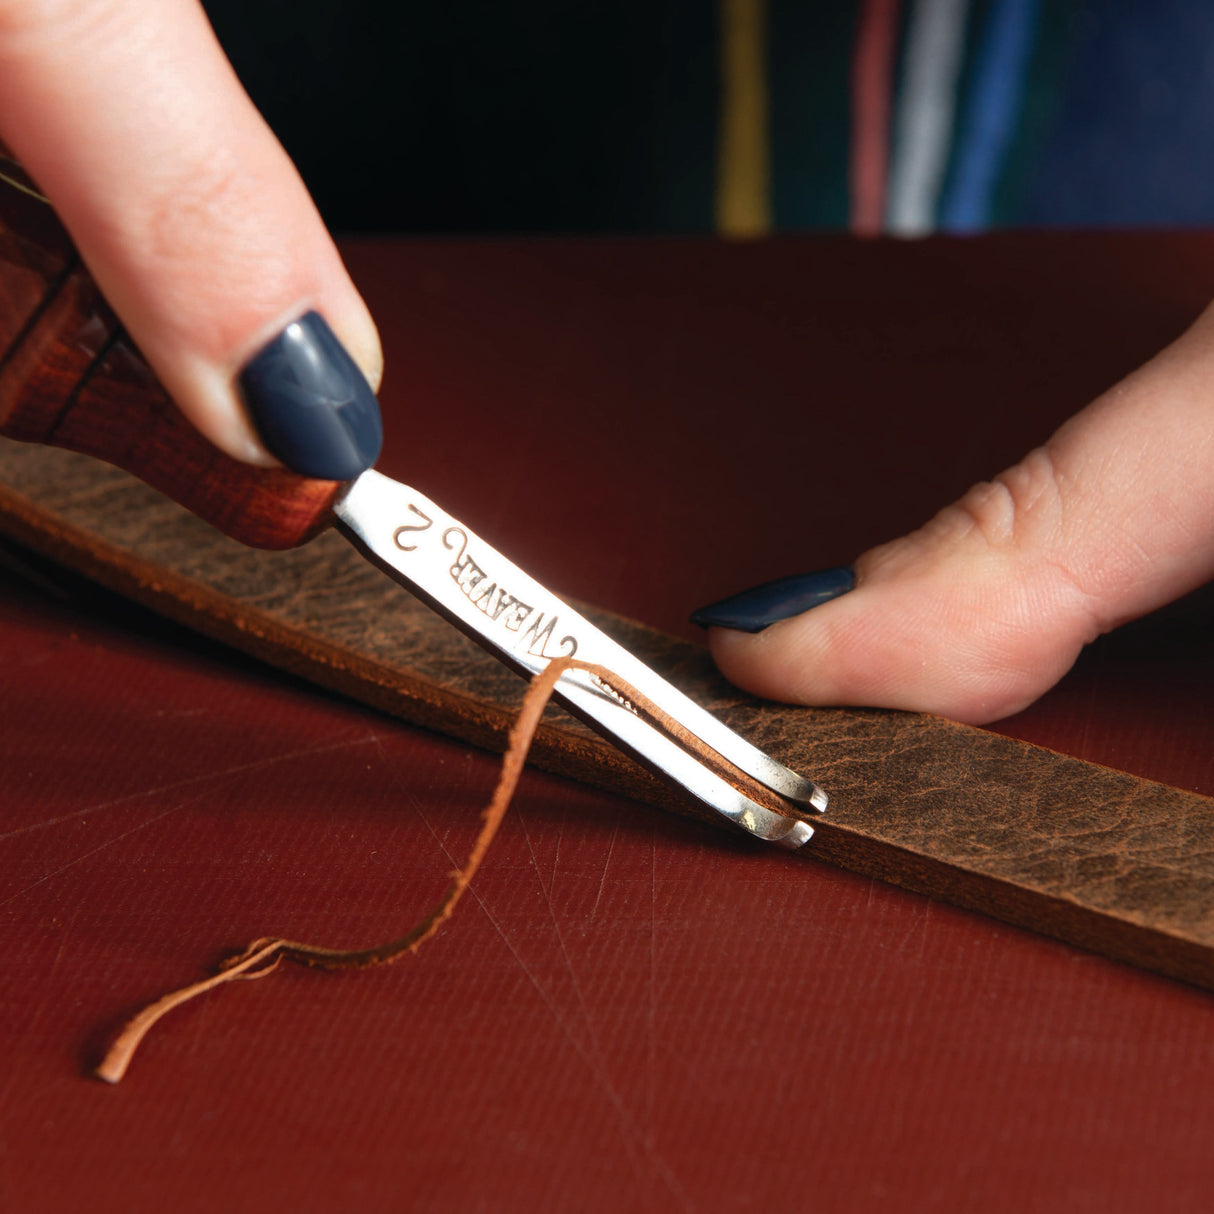 How To Burnish Leather Edges - Weaver Leather Supply